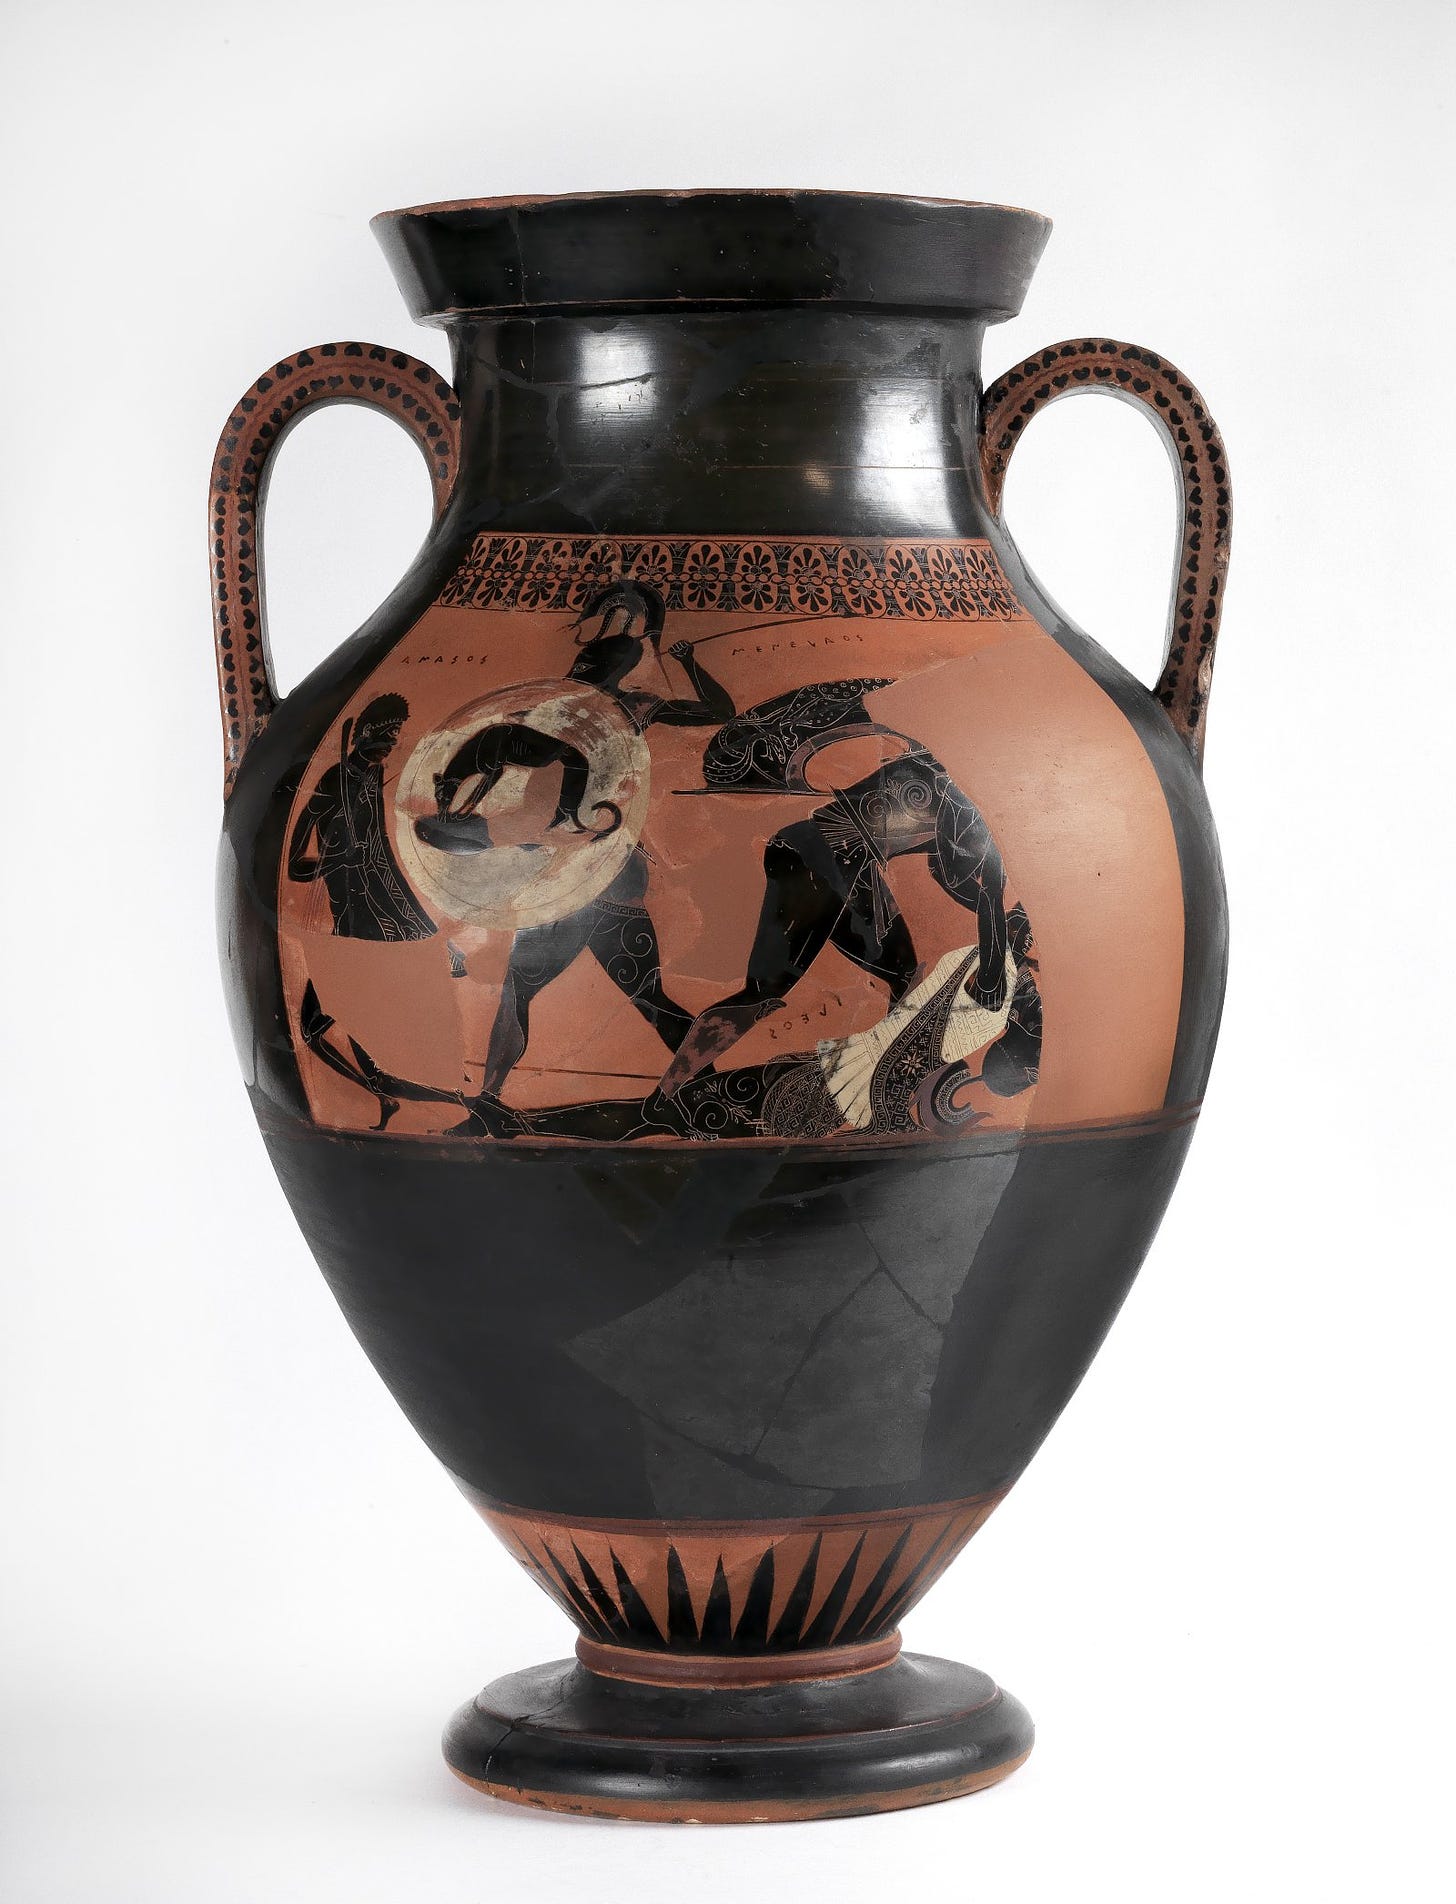 Black figure vase: Side A: Ajax with the body of Achilles. Left, Menelaos (labeled), holding a round shield (device: dog with a haunch of a hoofed animal), has pushed his spear into the chest of a naked Aithiopian (labeled Amasos) who holds a club and a pelta (wicker shield). At right, Ajax bends to lift the dead body of Achilles (name partially preserved). B: Death of Antilochos. Antilochos (labeled) lies slain in center. Three warriors run to left: two helmeted warriors with round shields (device of one shield: crow) and spears and a bearded man in a flapped hat. They chase two naked men, one carrying a pelta, away from the body of Antilochos Palmette lotus chain above panels. With Greek dipinto inscriptions. The foot is not preserved, restored in plaster.